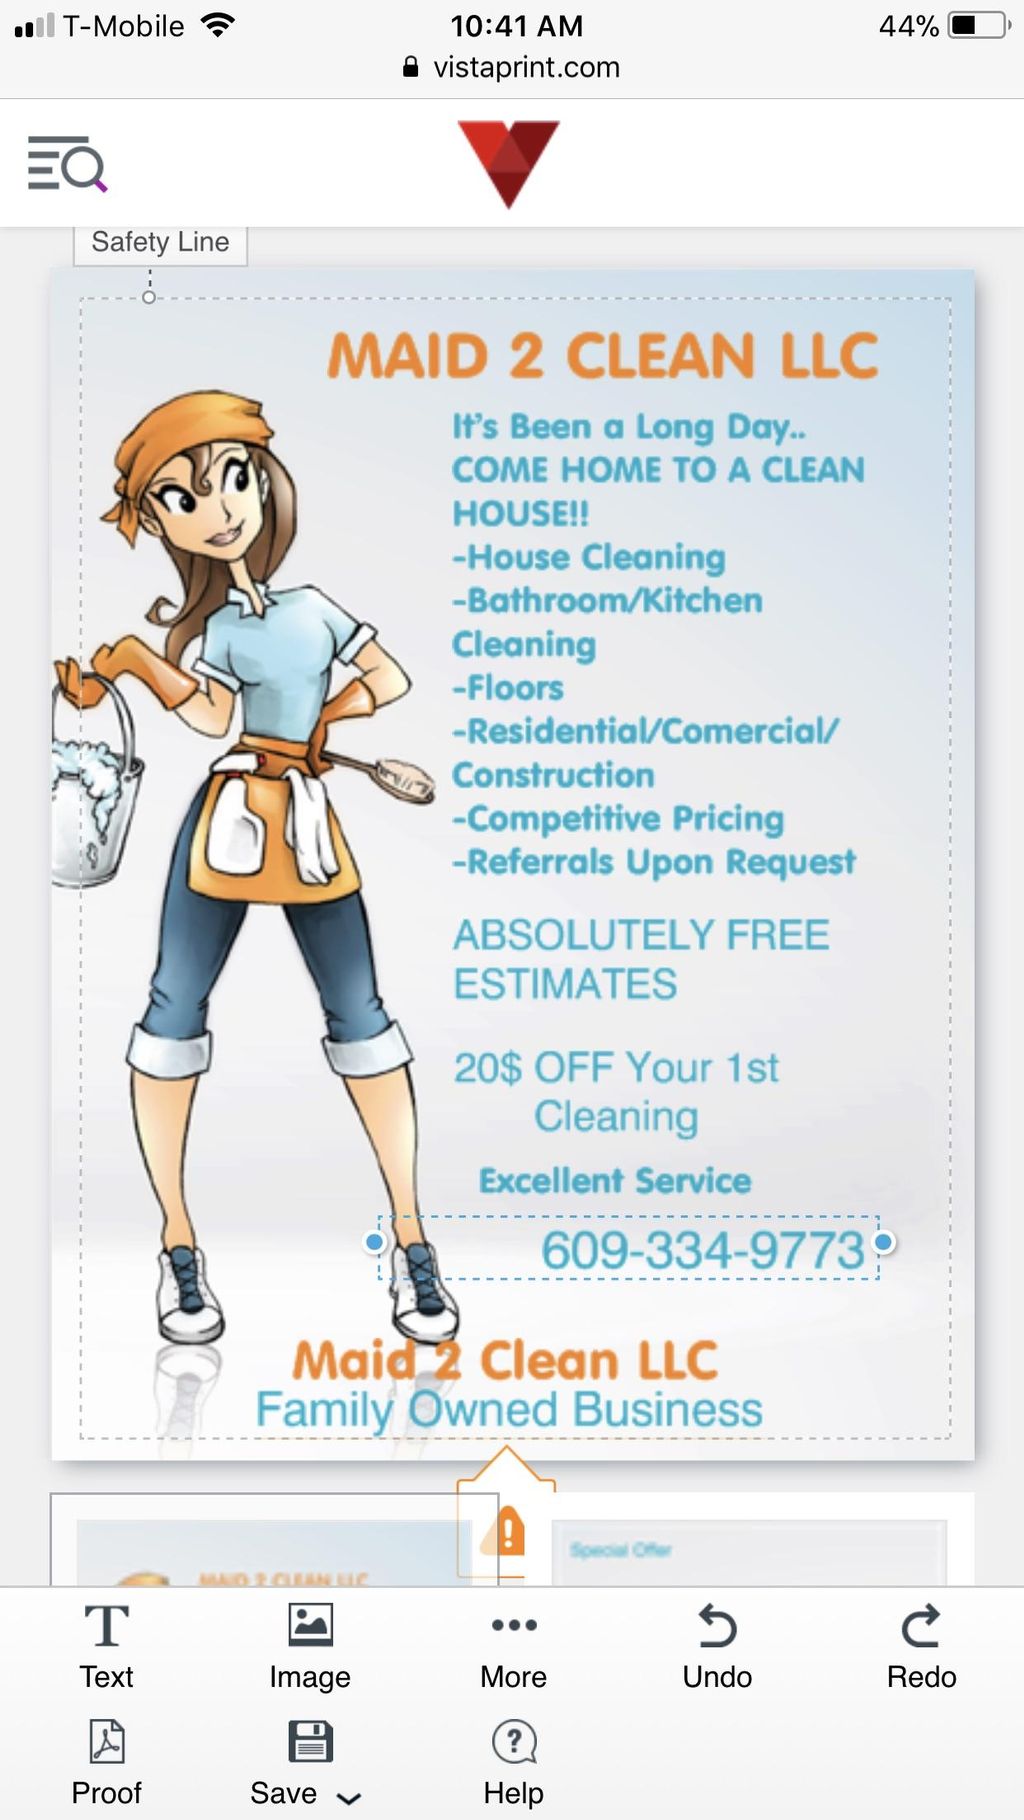 Maid 2 Clean LLC - EXCELLENT QUALITY